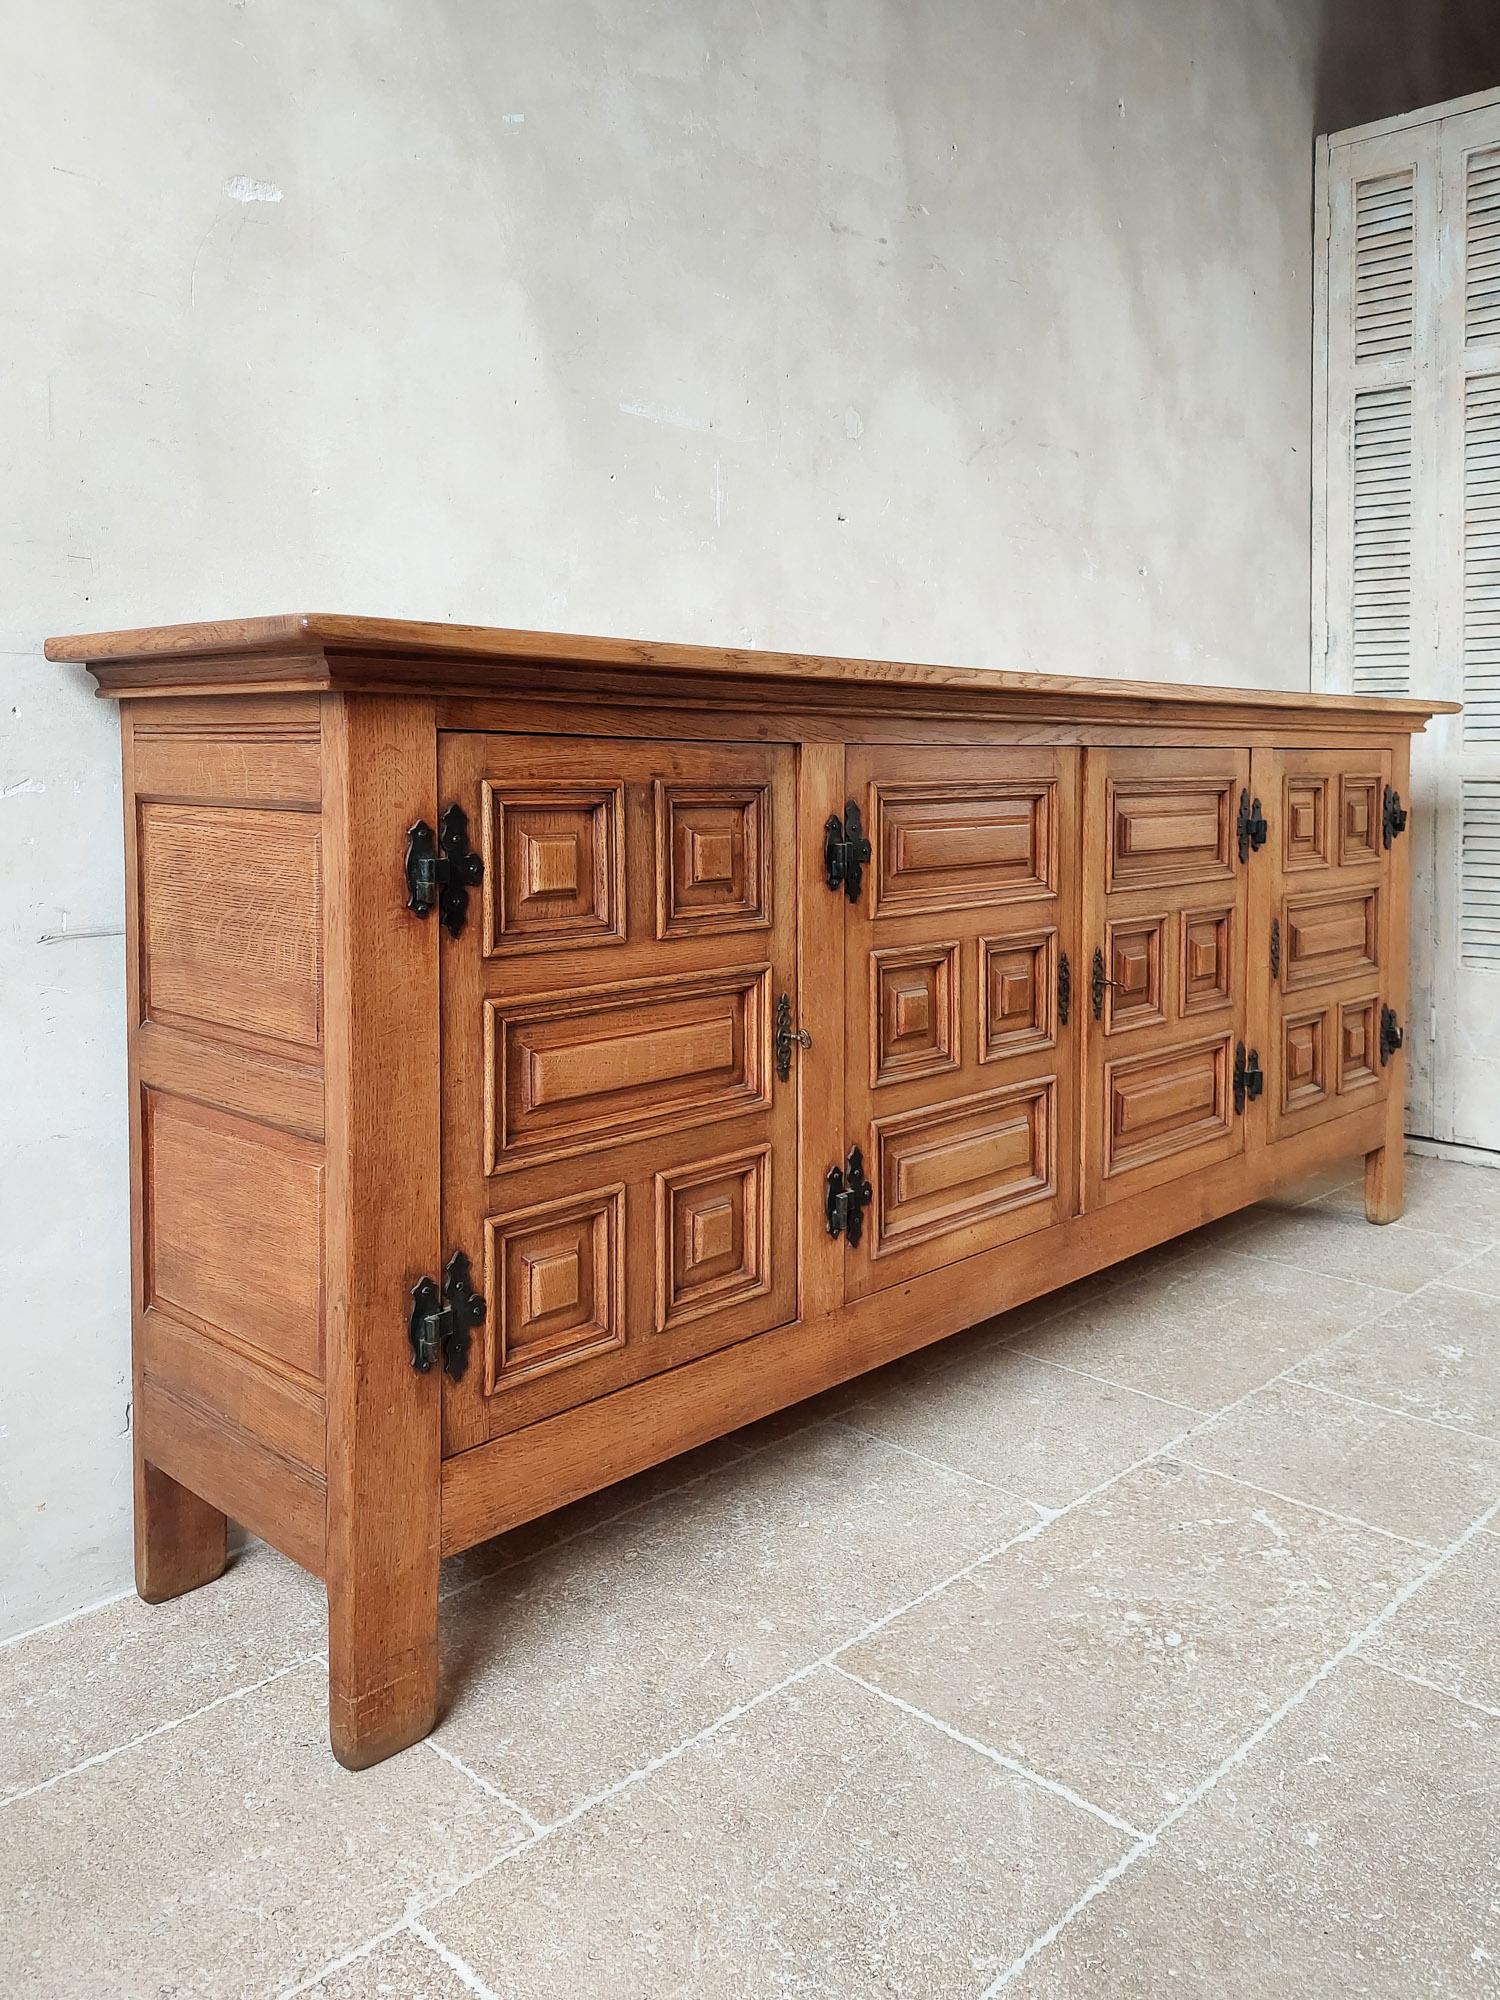 Midcentury Spanish oak sideboard, 1950s. Beautiful solid oak sideboard in Spanish rustic modernist style. With four doors decorated with geometric panels and wrought iron hardware. A spacious interior with shelves across the width and two drawers.